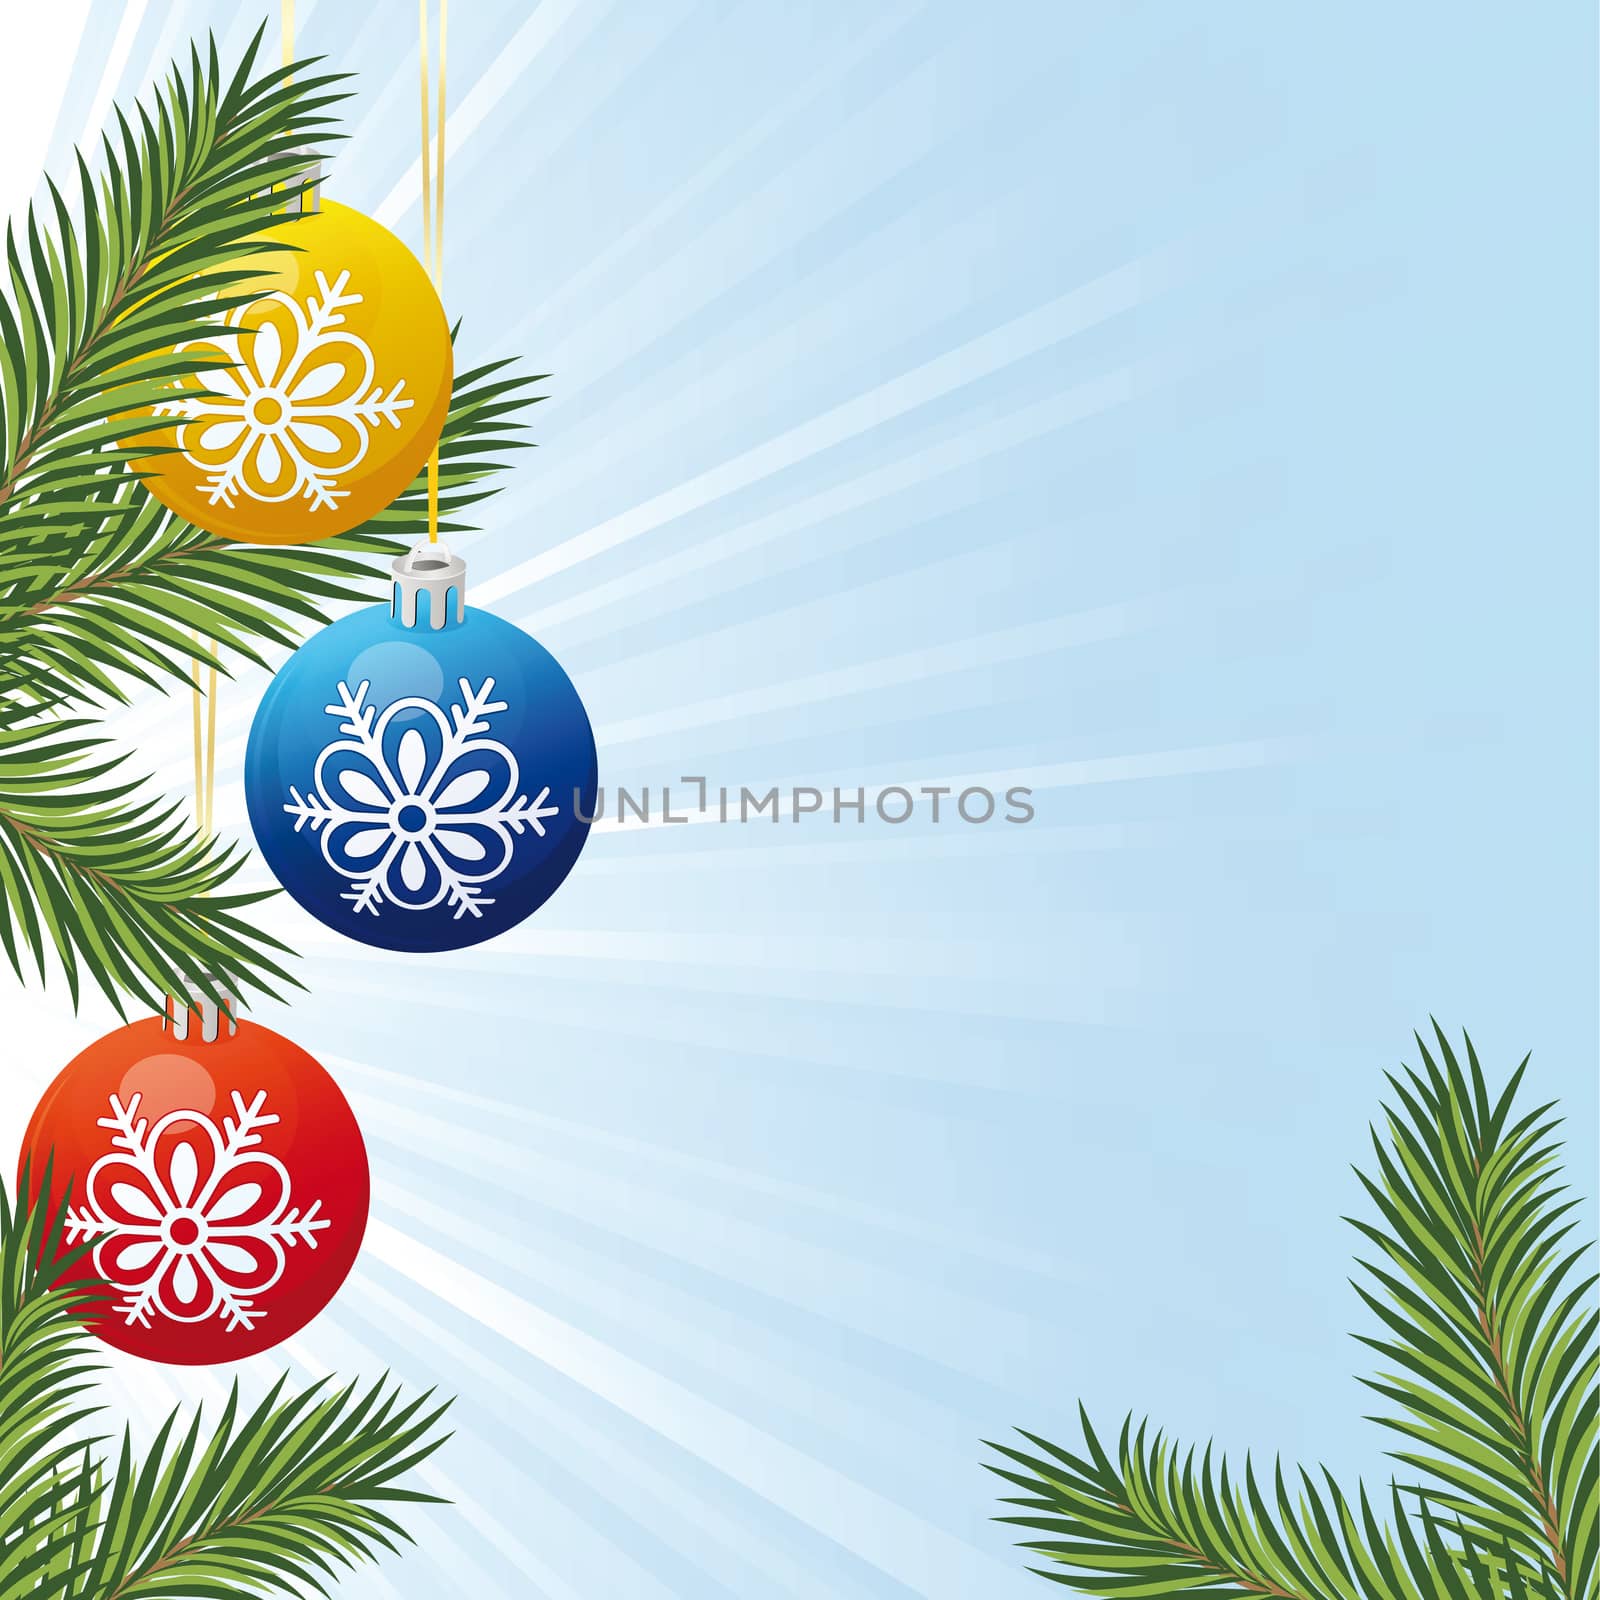 Background with Christmas tree branch toys and rays